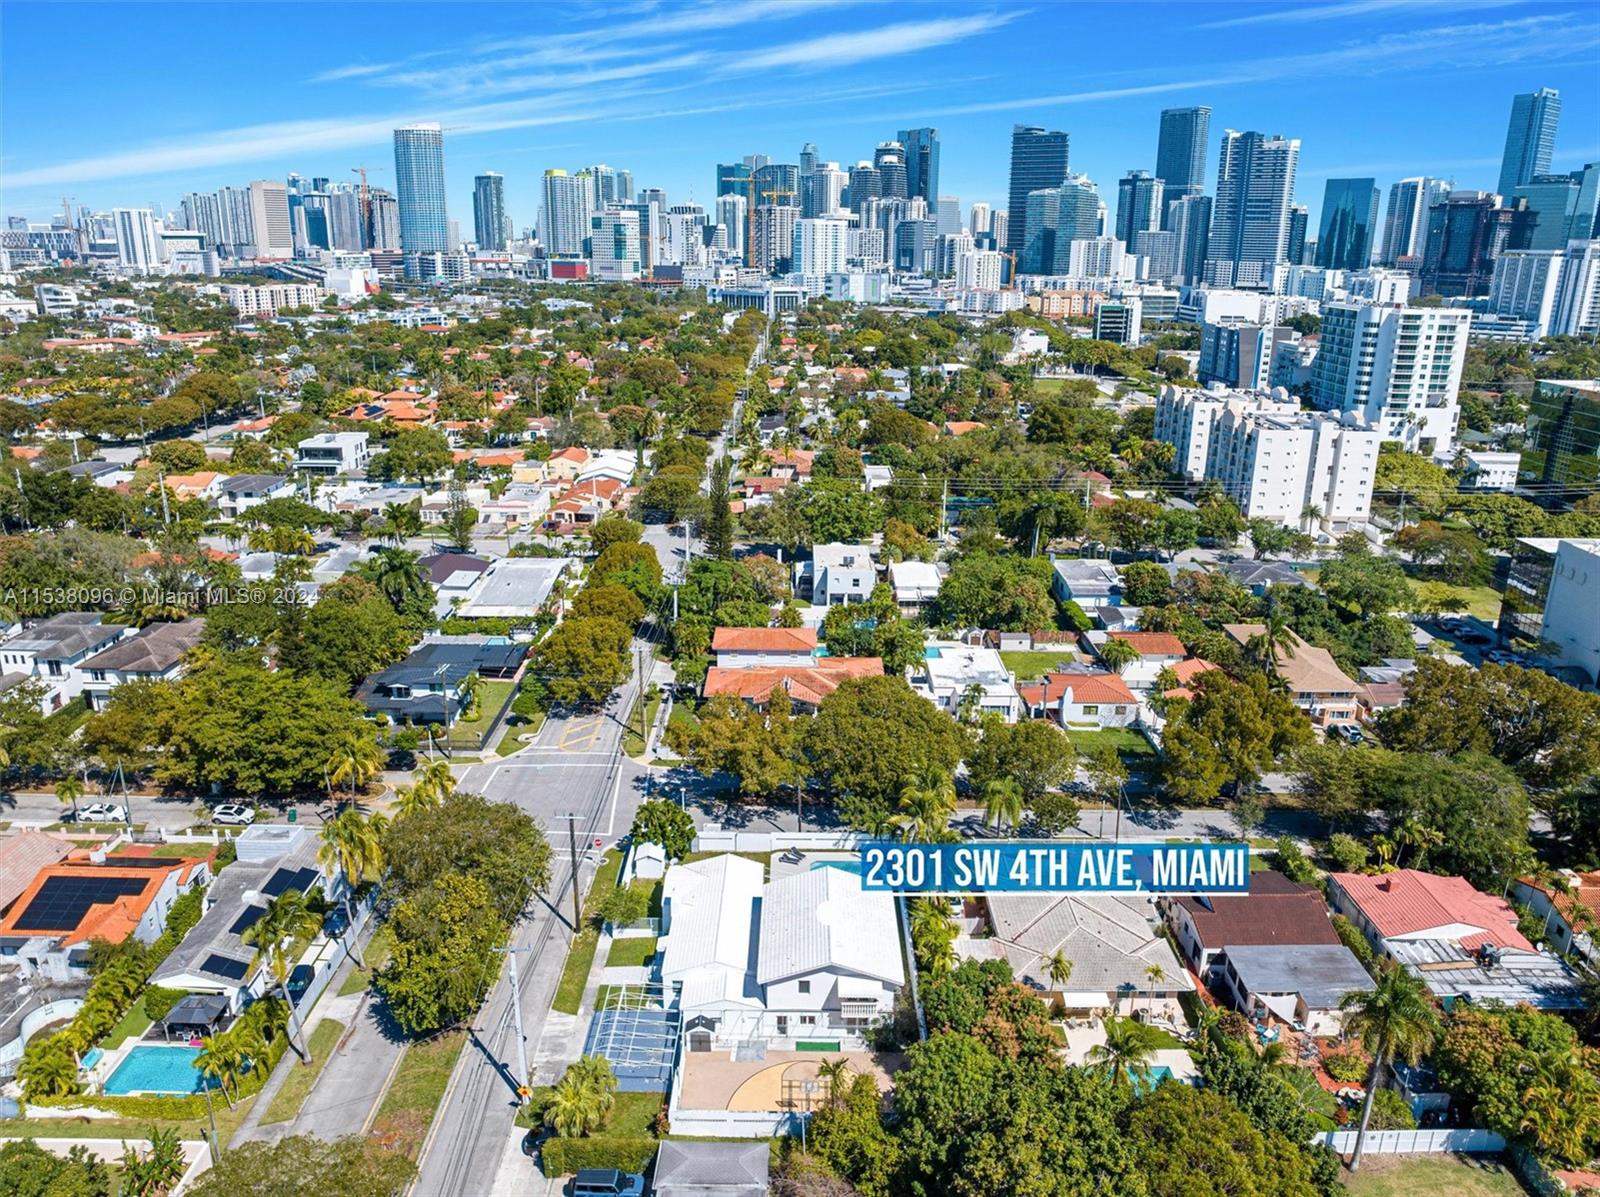 Welcome to the heart of Miami. "The Roads" (Brickell States). Take advantage of this gem. Two-story home on a rare 11,597 sq. ft corner lot with a 4,065 sf living space and six beds/ five baths. Surrounded by a concrete 6' tall wall and a huge pool 8' deep, both grandfather by the site of Miami. Enjoy the 2nd-floor master bedroom, open layout of a 1300sf with jacuzzi, two balconies, and Brickell views. Great opportunity to convert 2M dollars plus home into a 4M dollar plus mansion. Renovated: 2000 and 2023. Under appraisal value and best price for SF in the neighborhood. IDEALLY for investors or anyone with vision 2+ M Dollar house on a 4+ million
WALKING DISTANCE TO KEY BISCAYNE BEACH. Must see! Don't missed!